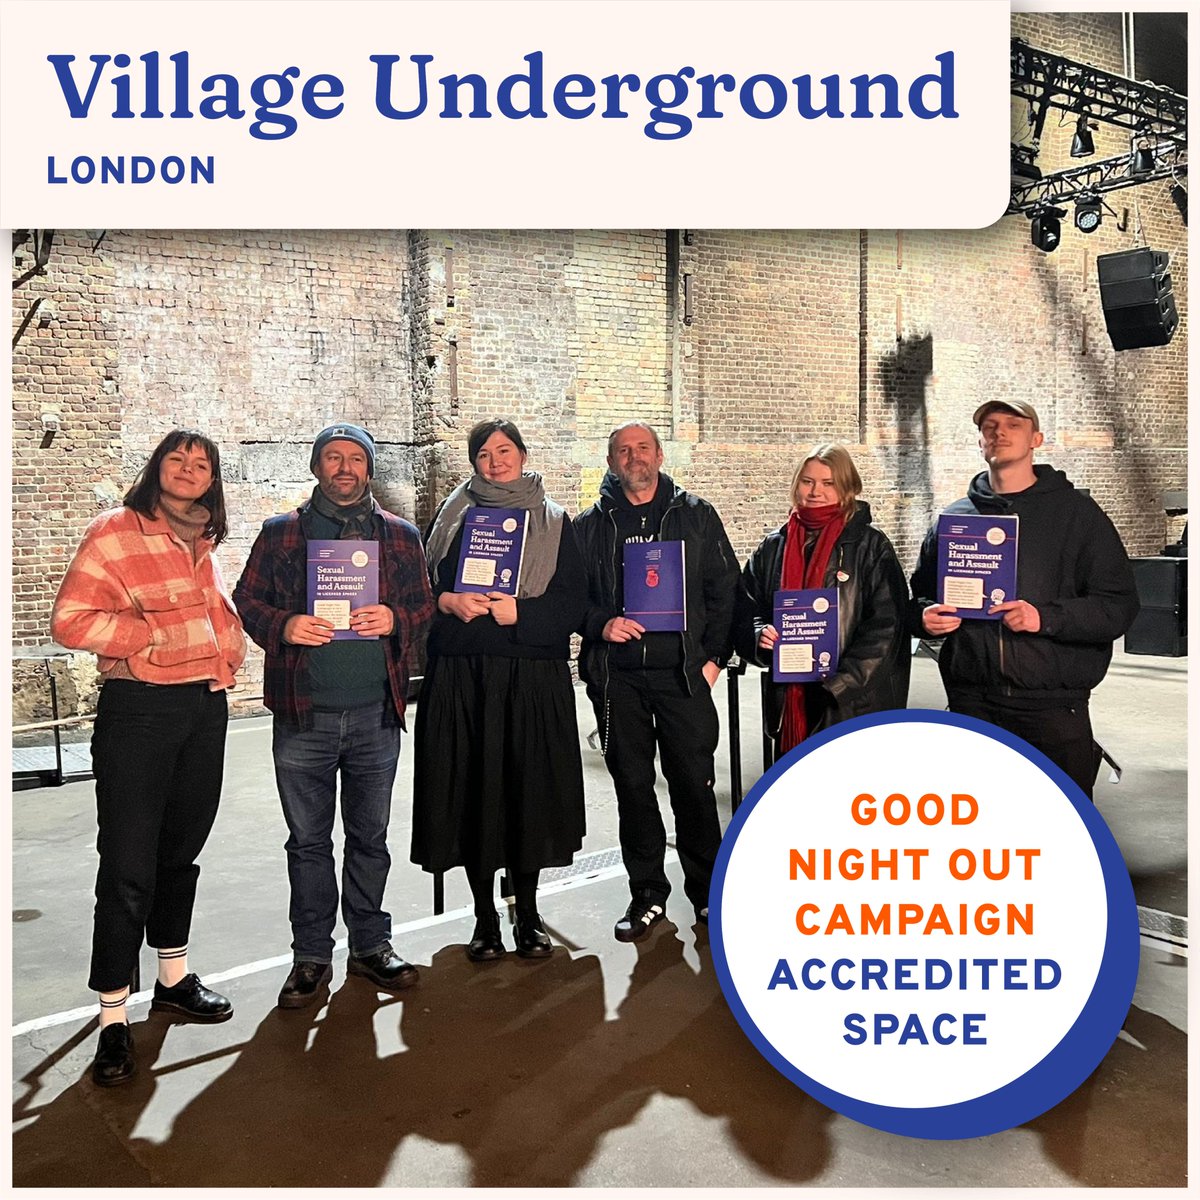 We’re always happy to work with independent music venues at Good Night Out, so we’re pleased to have recently re-accredited @villageundrgrnd! 🙌 (1/4)